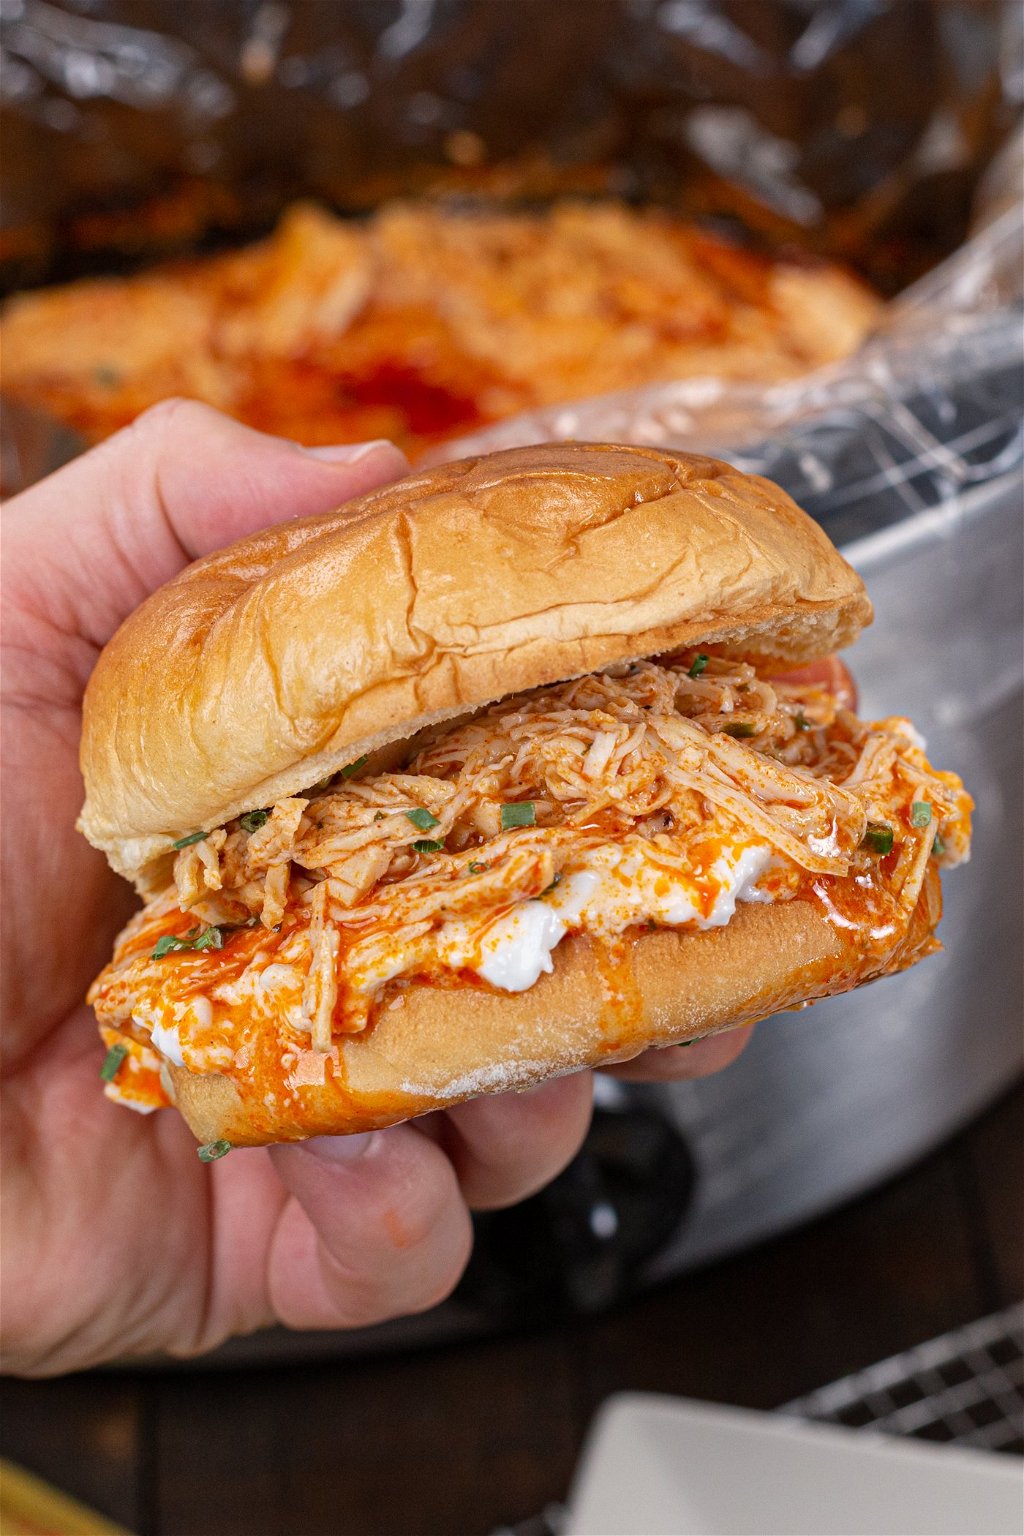 Slow Cooker Pulled Chicken Burger - Healthy Fitness Meals